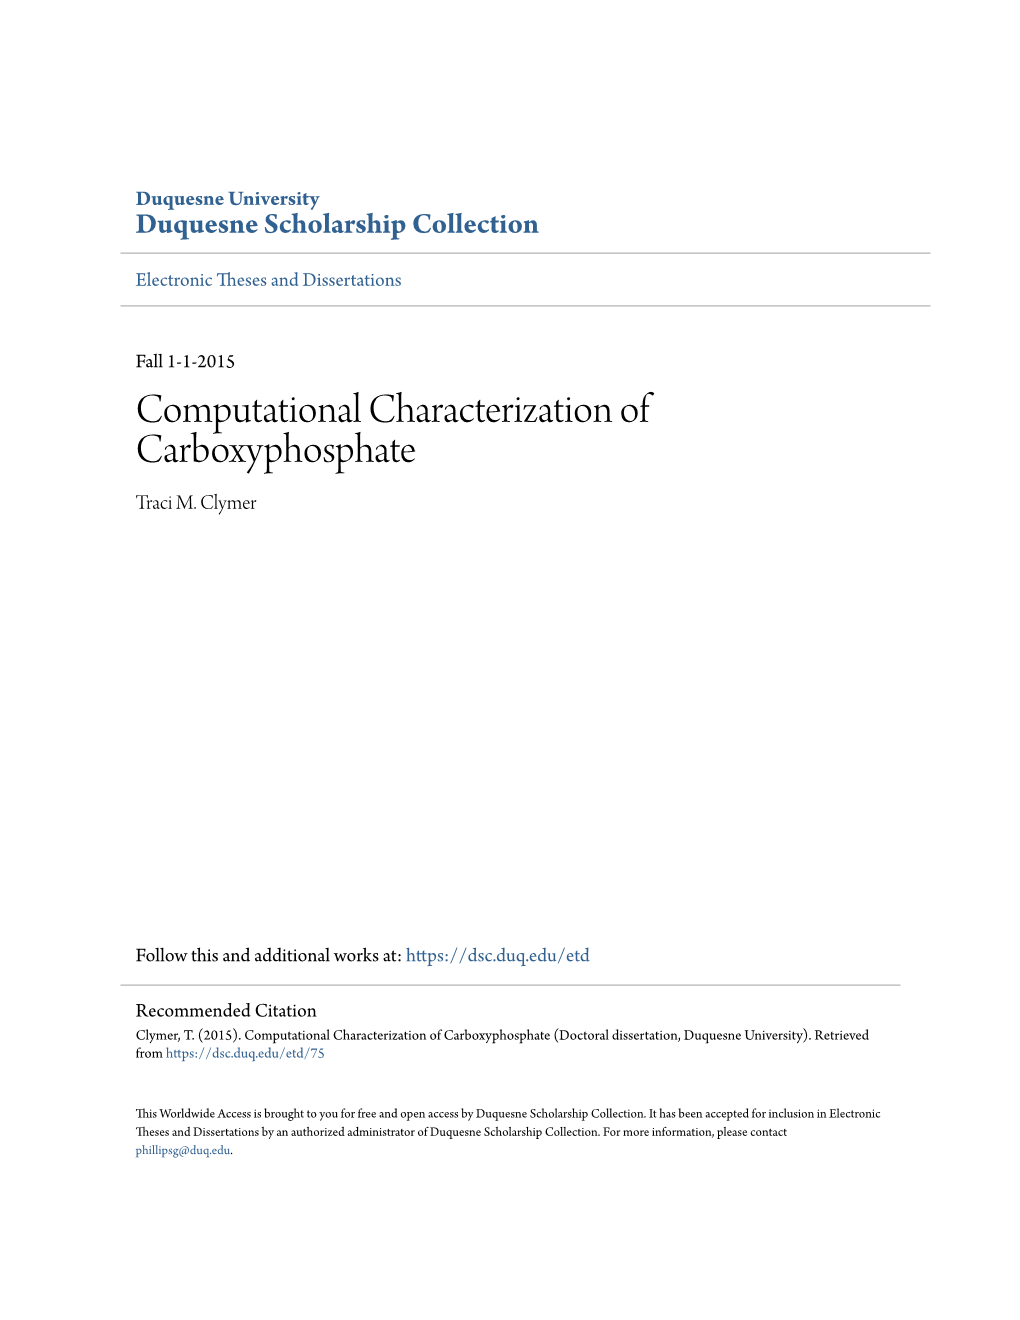 Computational Characterization of Carboxyphosphate Traci M